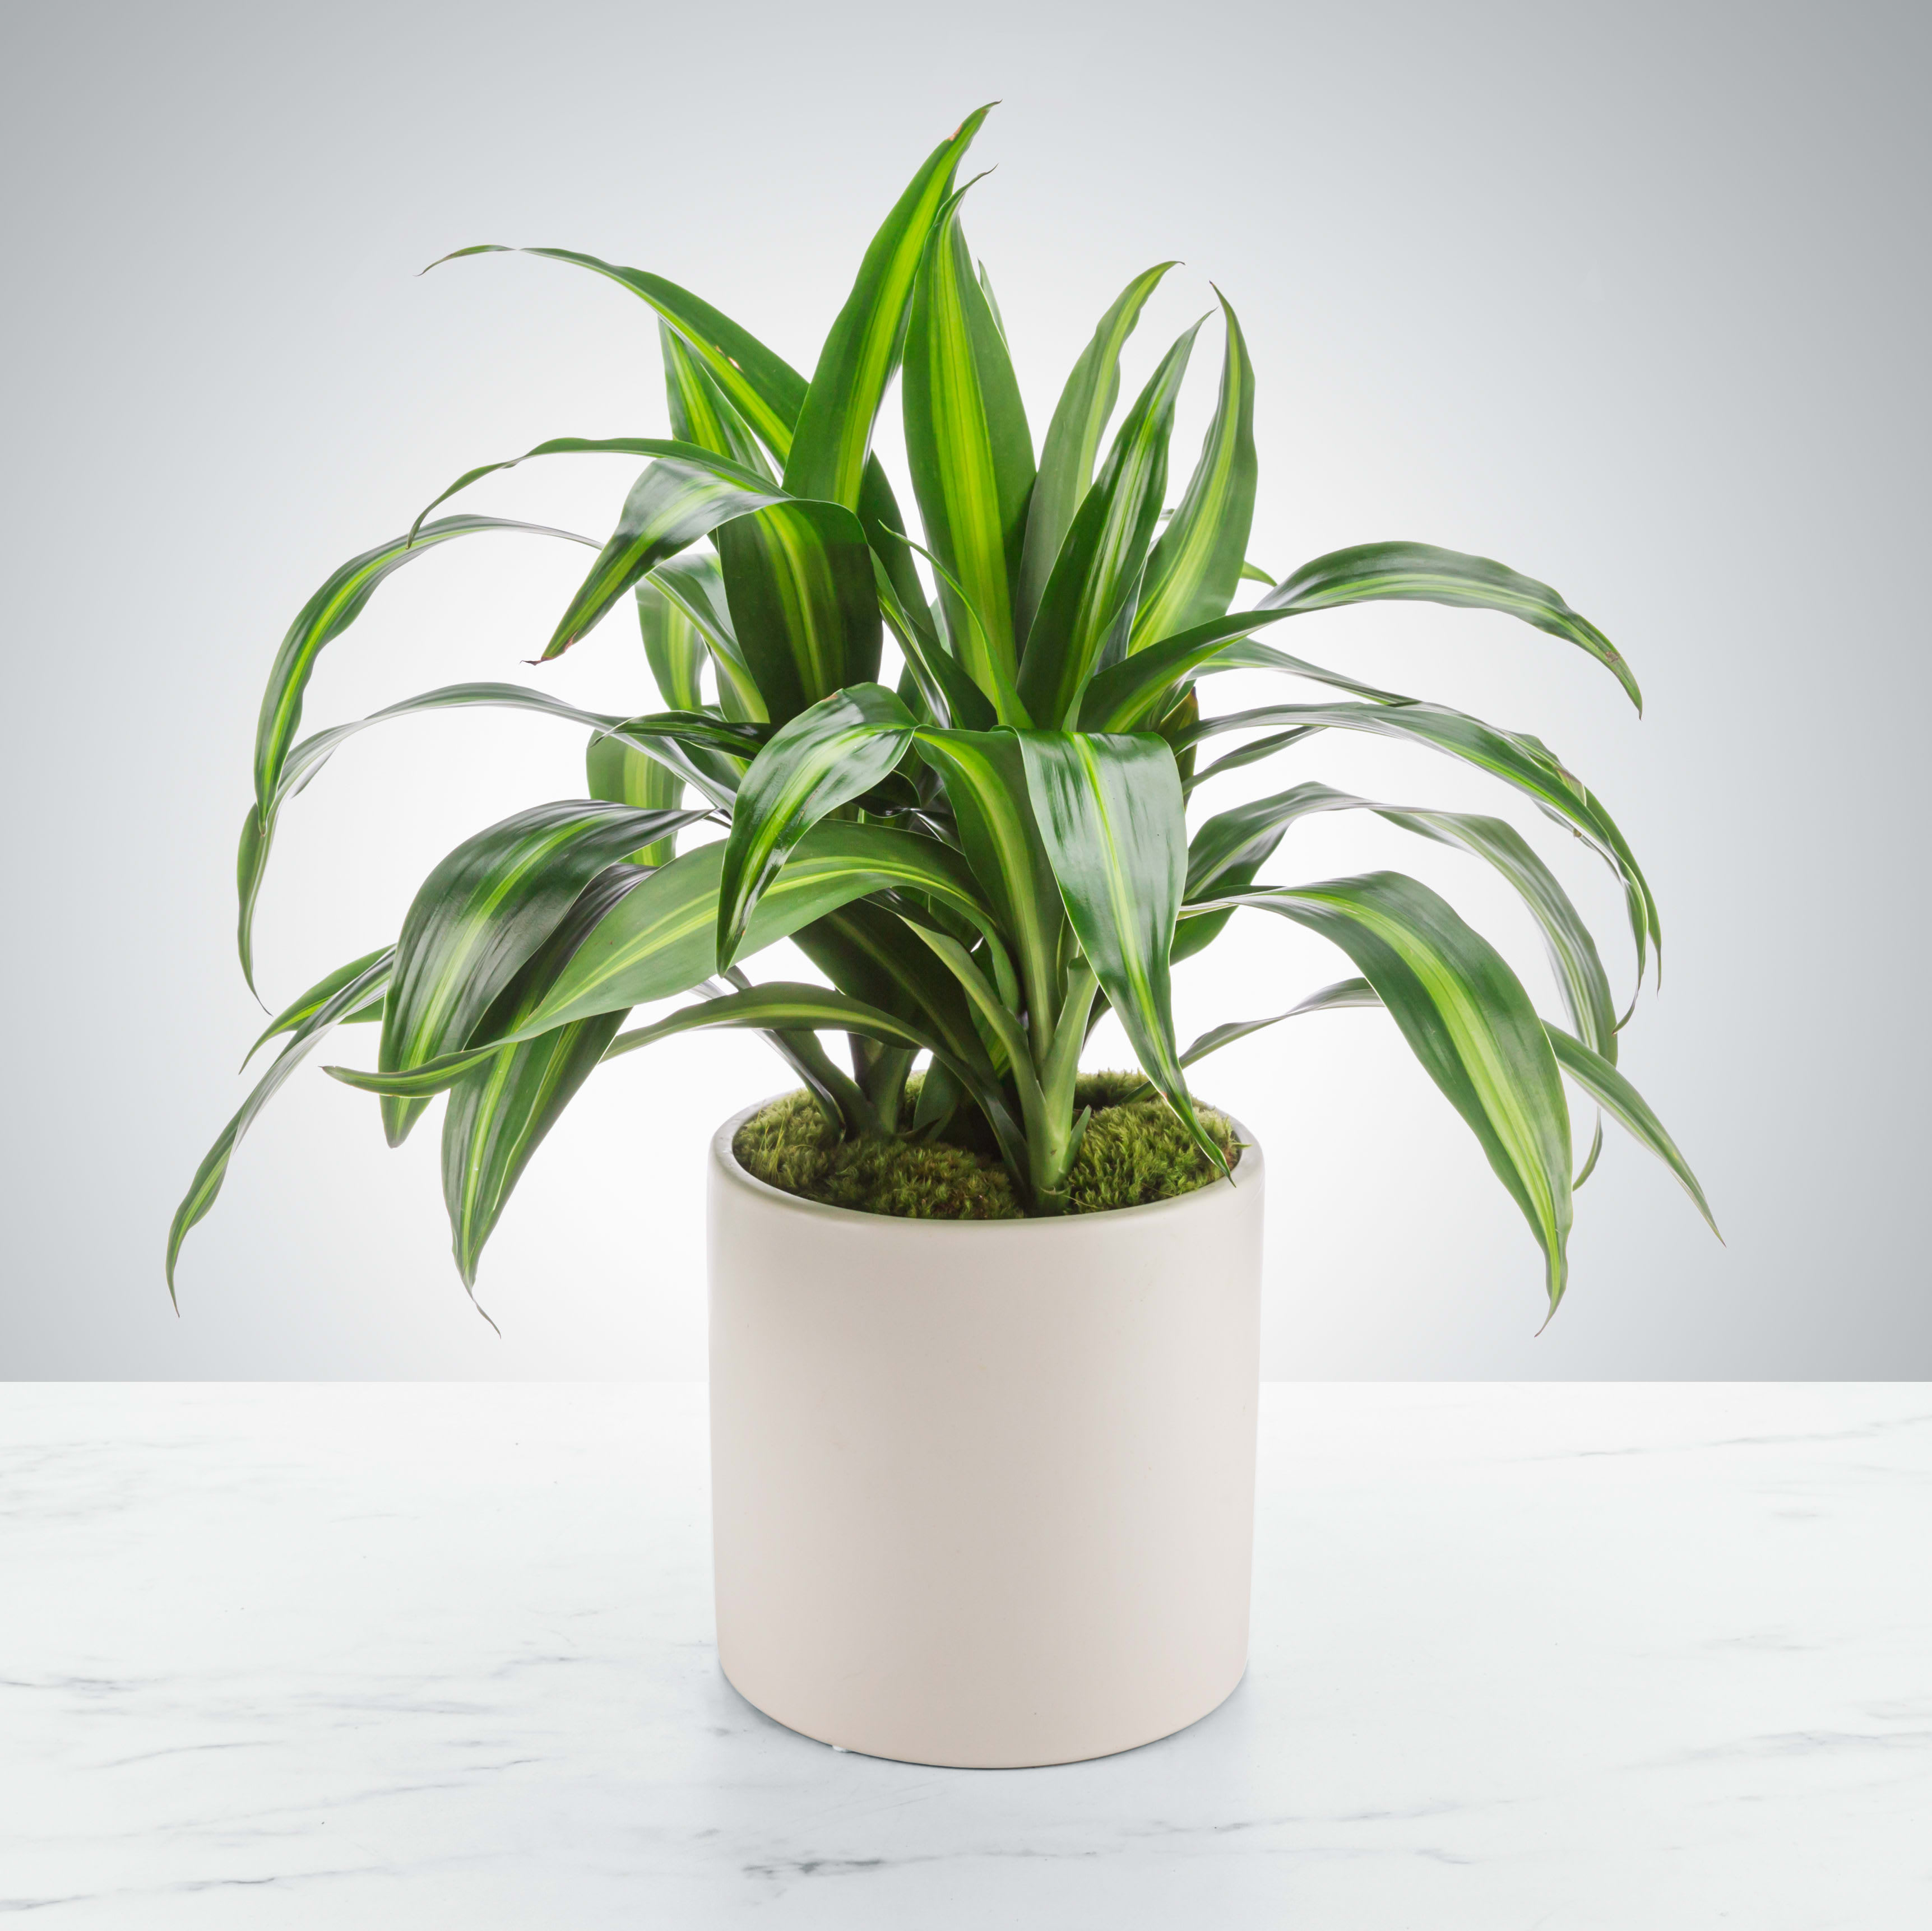 Dracaena Plant by BloomNation™ - Named after dragons and referred to as the dragon plant, these plants do an excellent job filtering the air, looking pretty, and being relatively sturdy. Send them to your favorite plant parent or plant newbie.